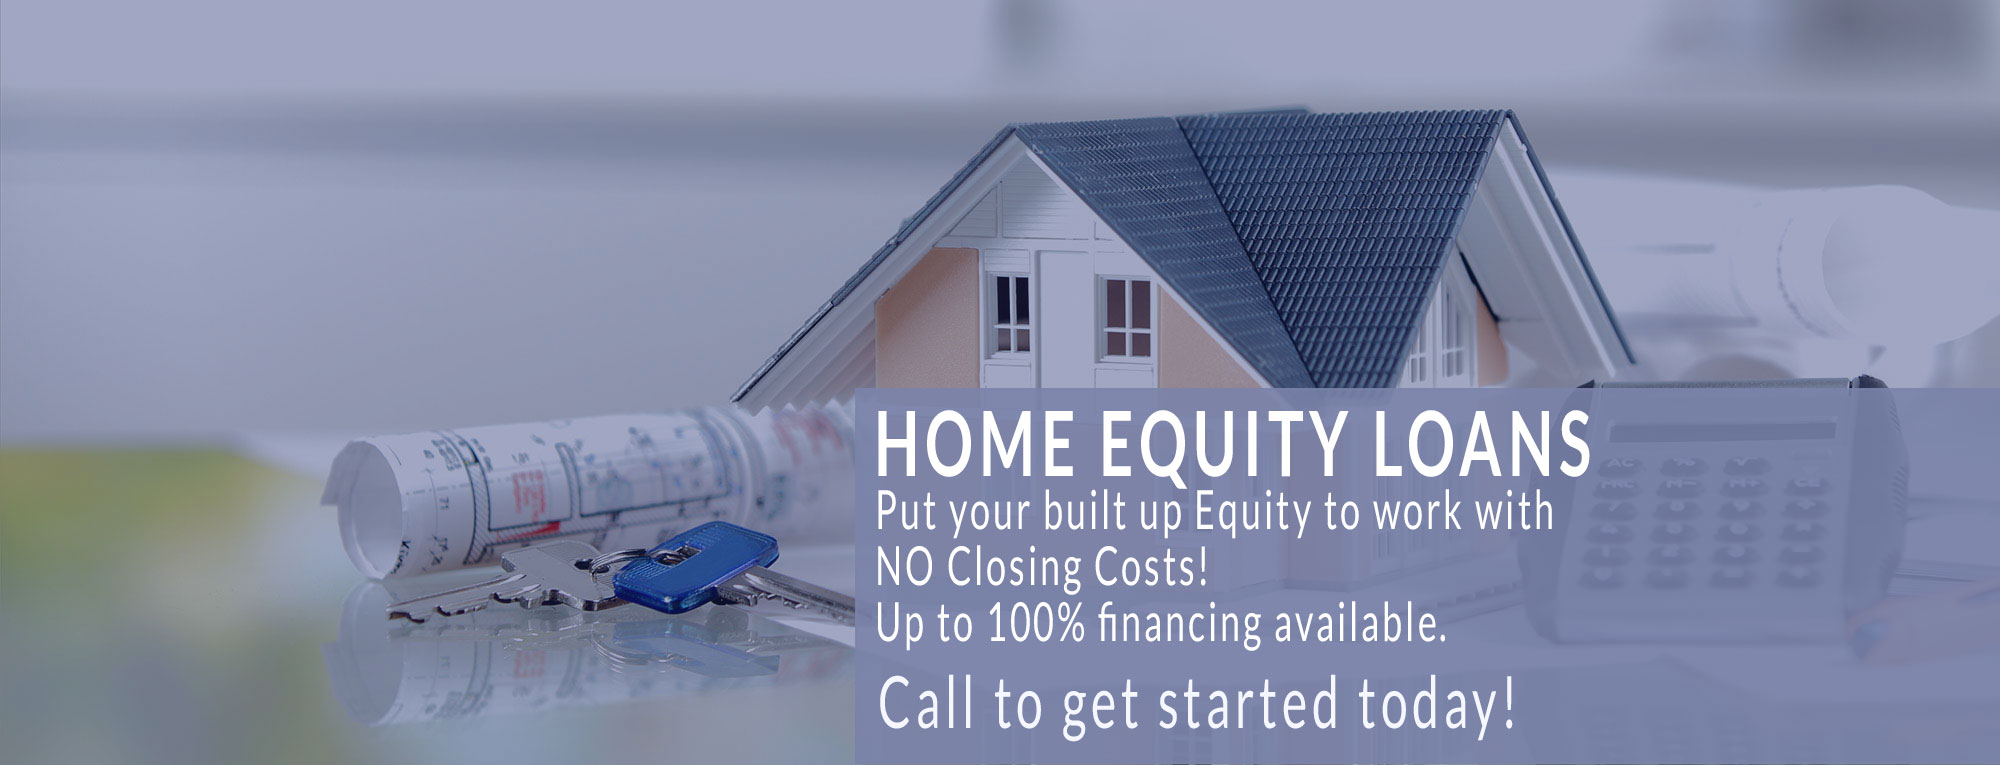 Home Equity Loans - Put your built up Equity to work with NO Closing Costs! Up to 100% financing available. Call to get started today!